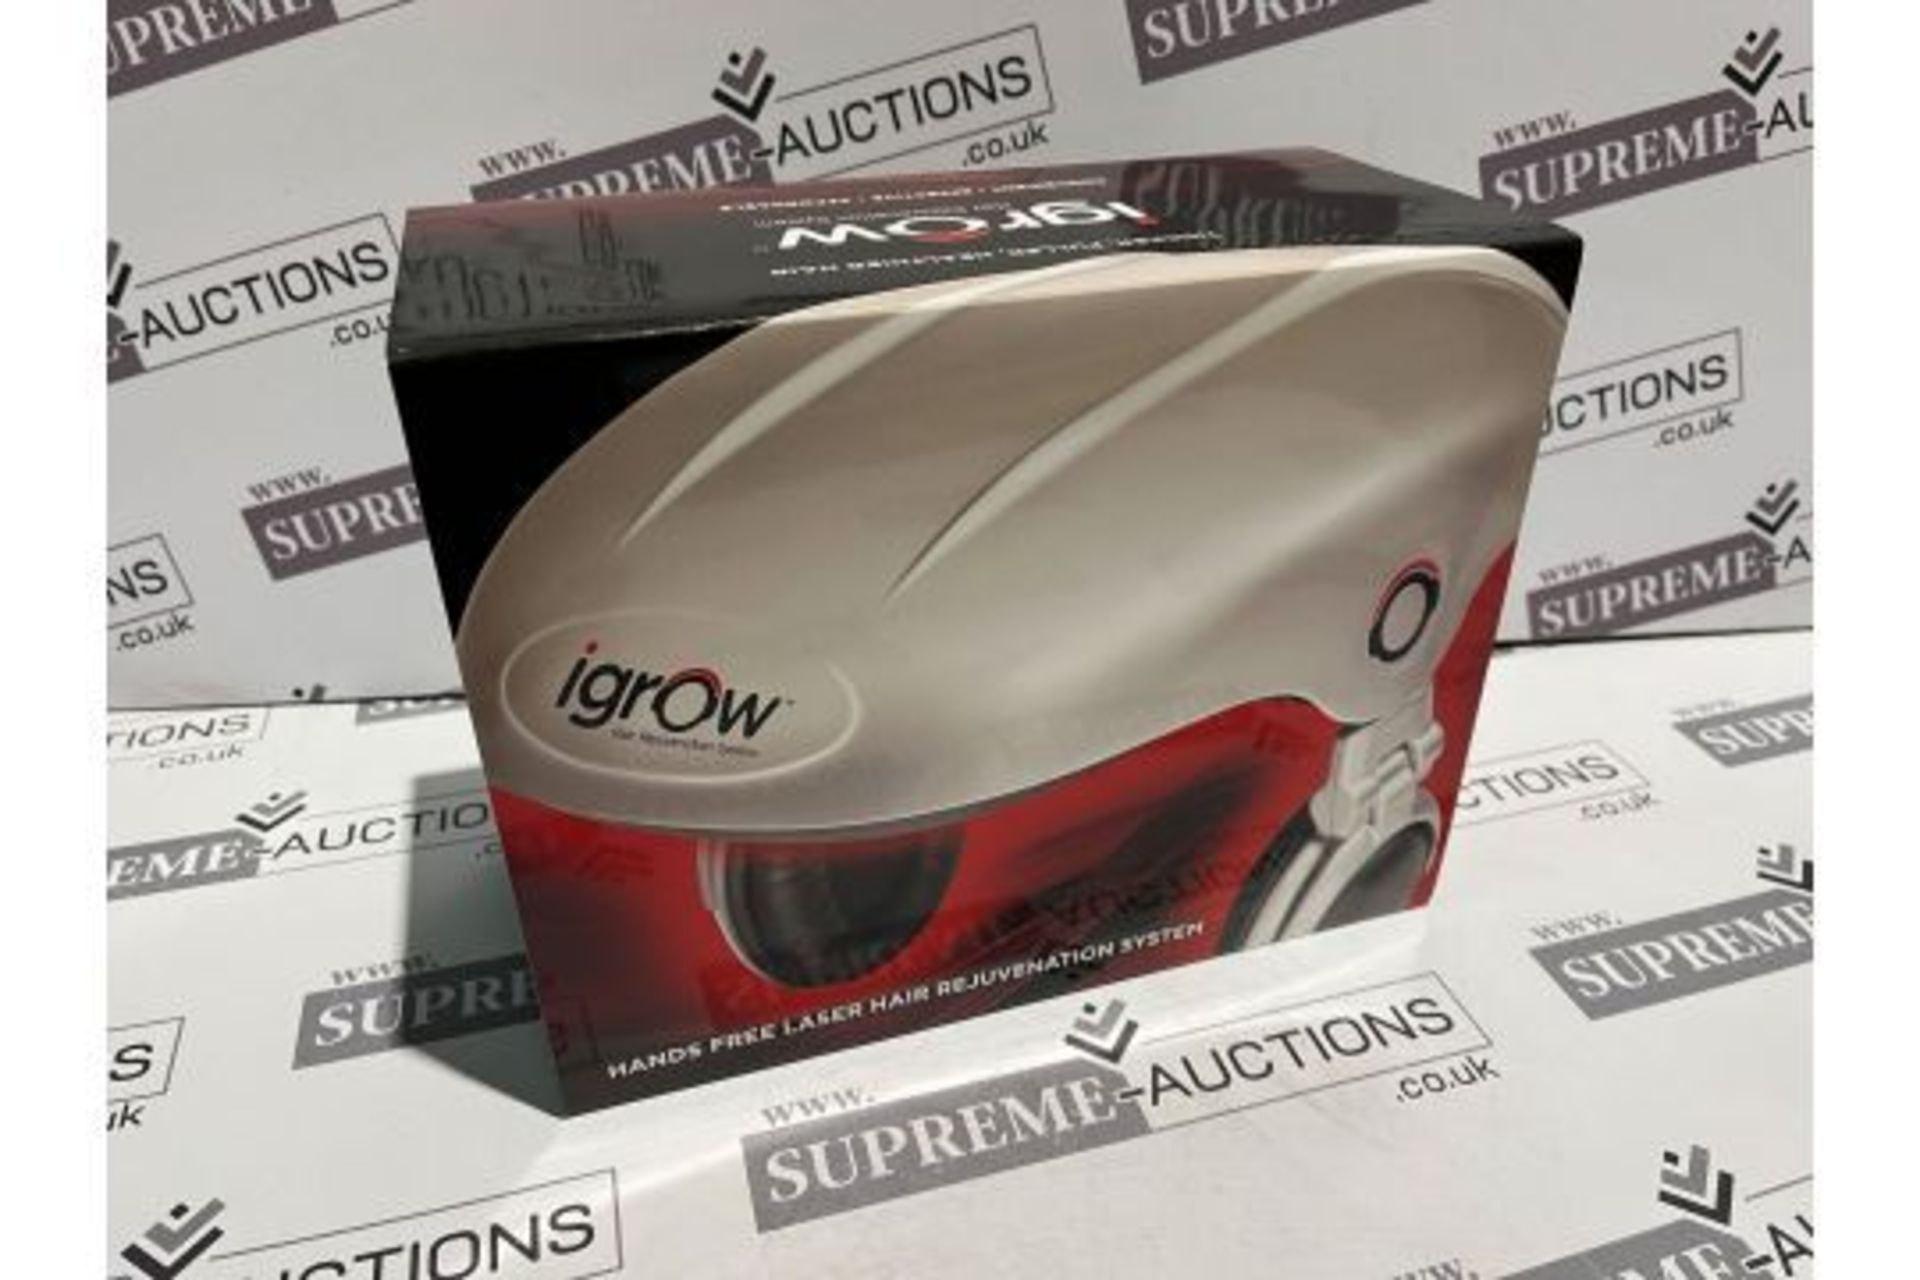 Brand New iGrow Professional Laser Hair Growth System - FDA Cleared Laser Cap Hair Growth for